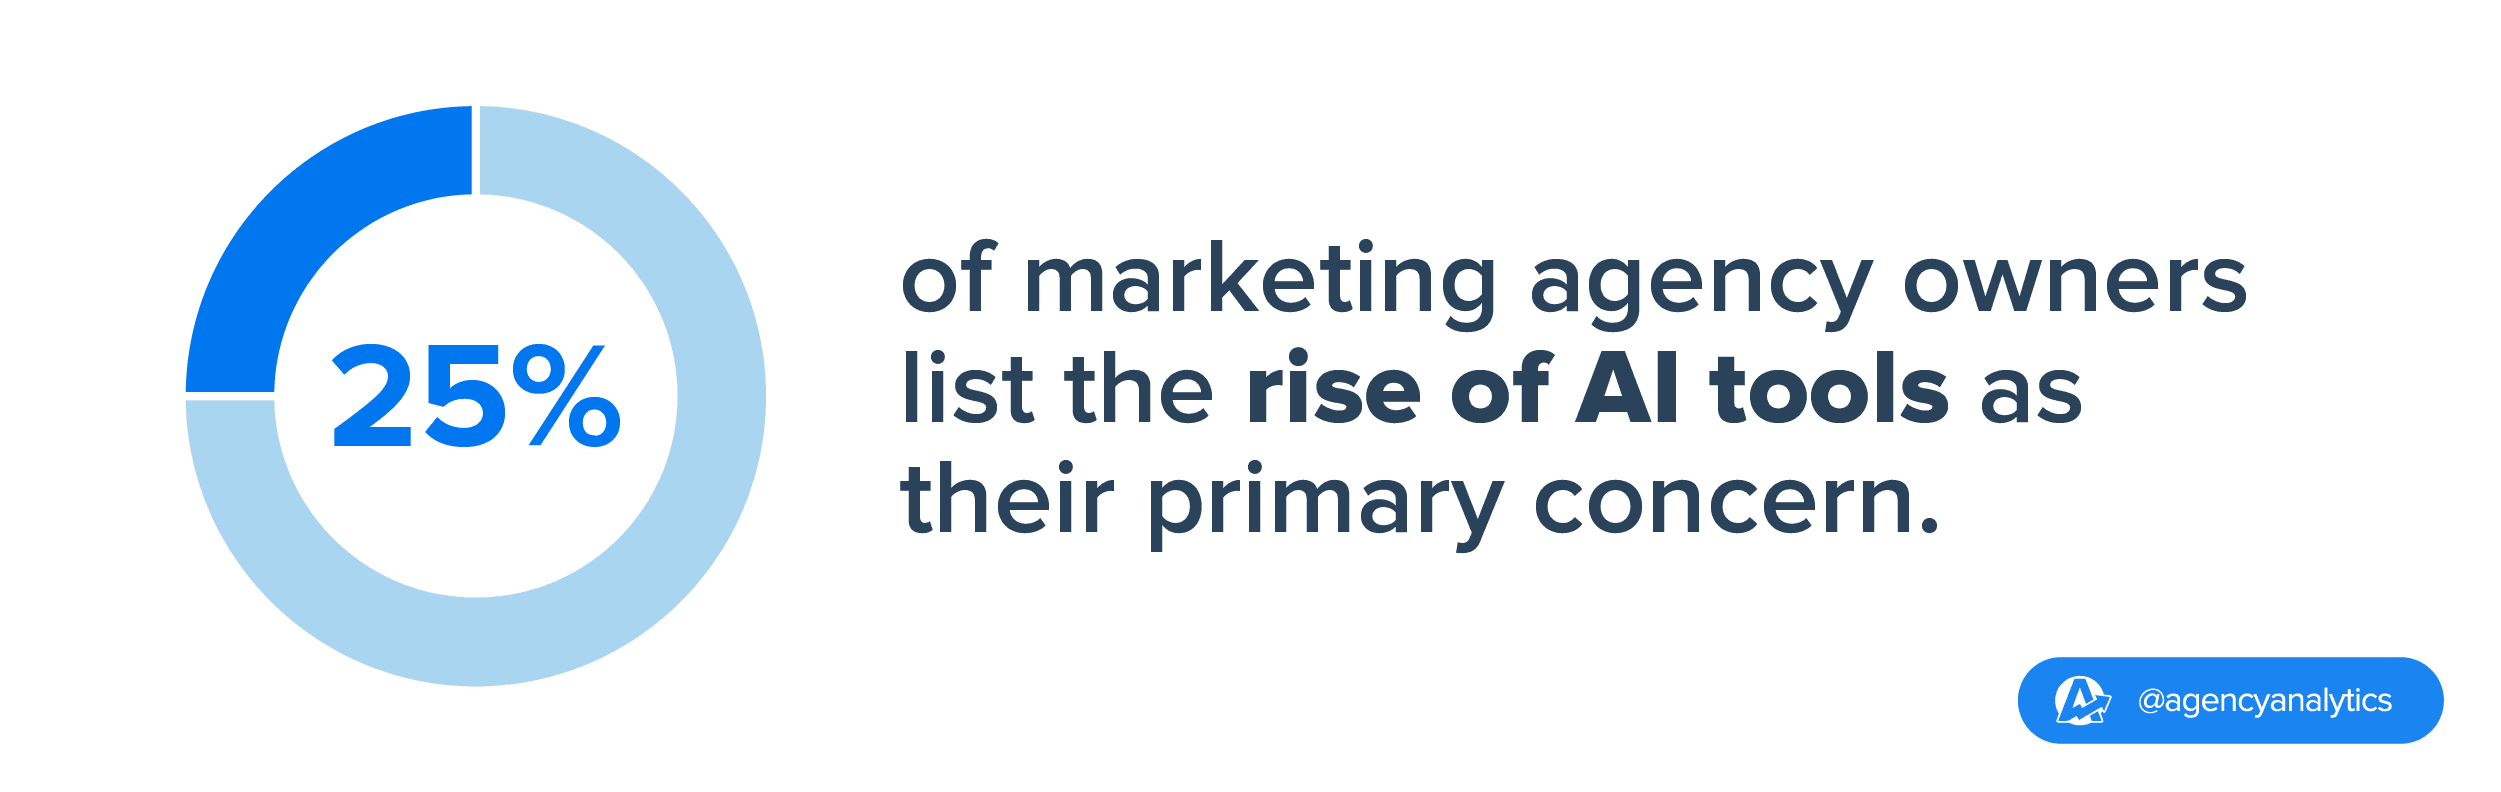 25% of Marketing Agency Owners are concerned about the rise of AI tools